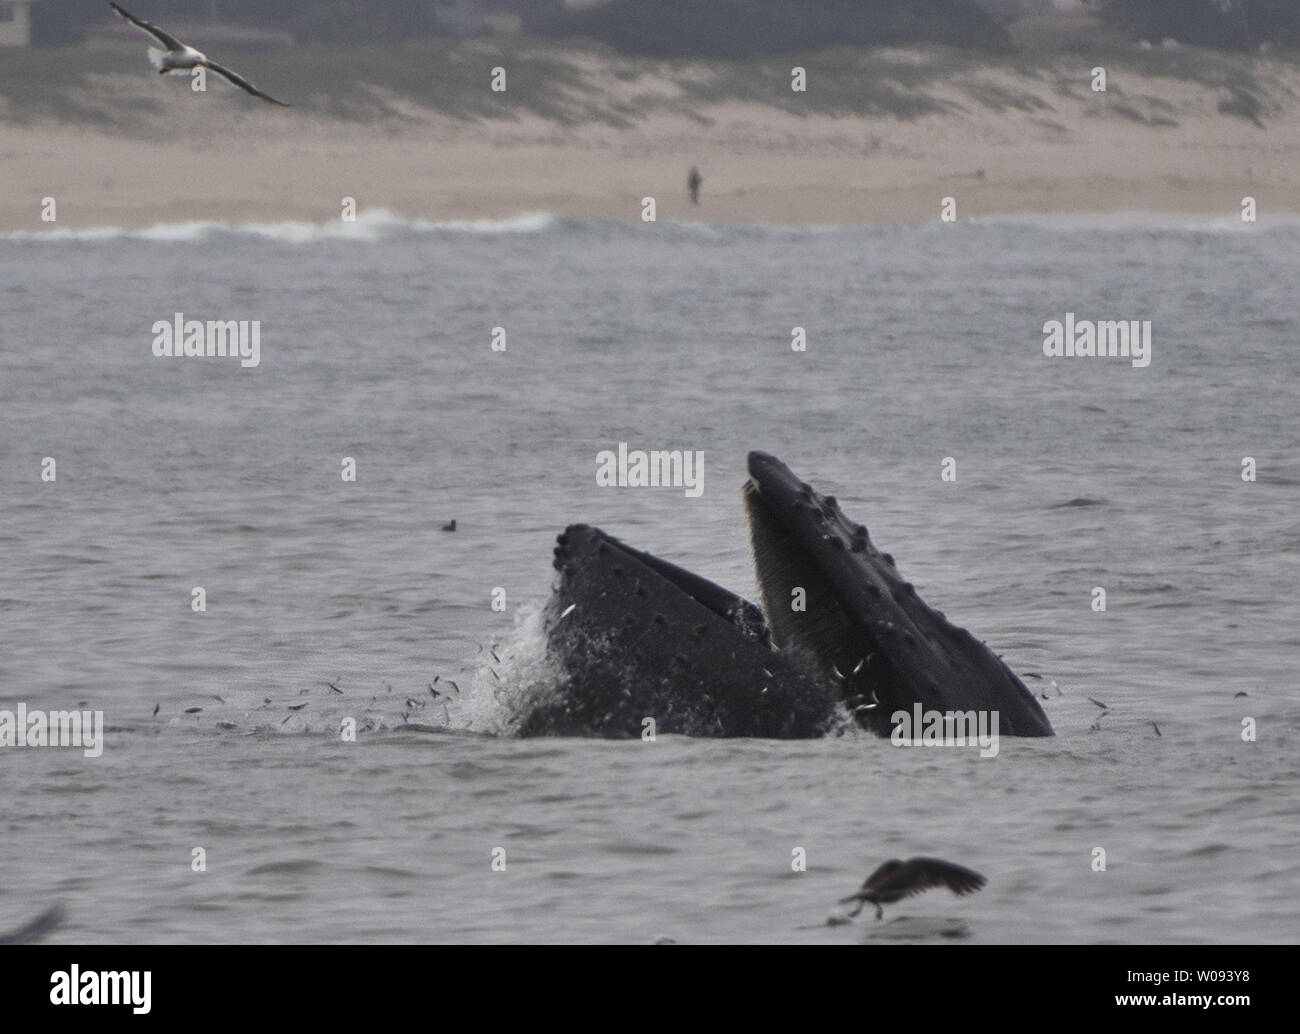 A whale gulps anchovies off the beach in Half Moon Bay, California on July 6, 2016. El Niño has brought abundant bait, flocks of birds, whales and tourists to Northern California beaches.   Photo by Terry Schmitt/UPI Stock Photo